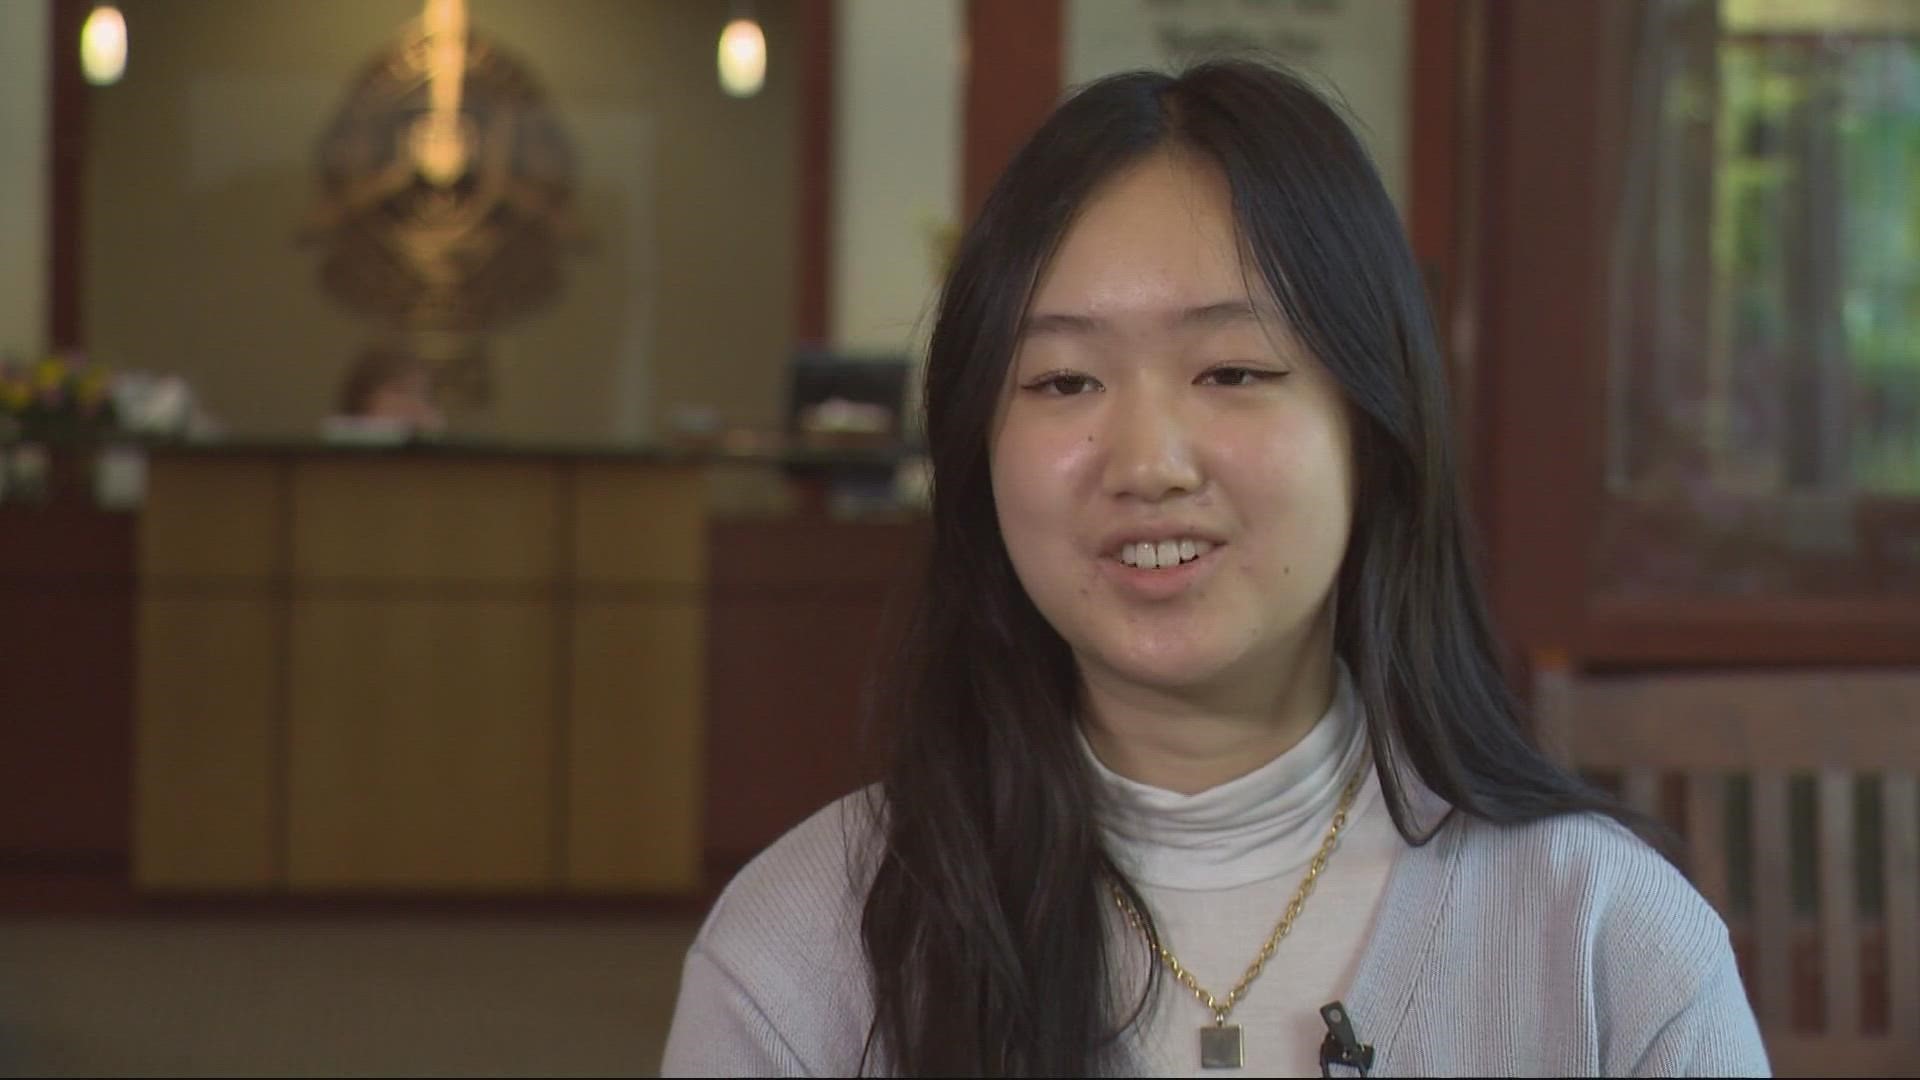 Jenny Duan is one of two seniors from Oregon to be named a finalist of the U.S. 2022 Presidential Scholars award. A total of 161 students earned the honor.